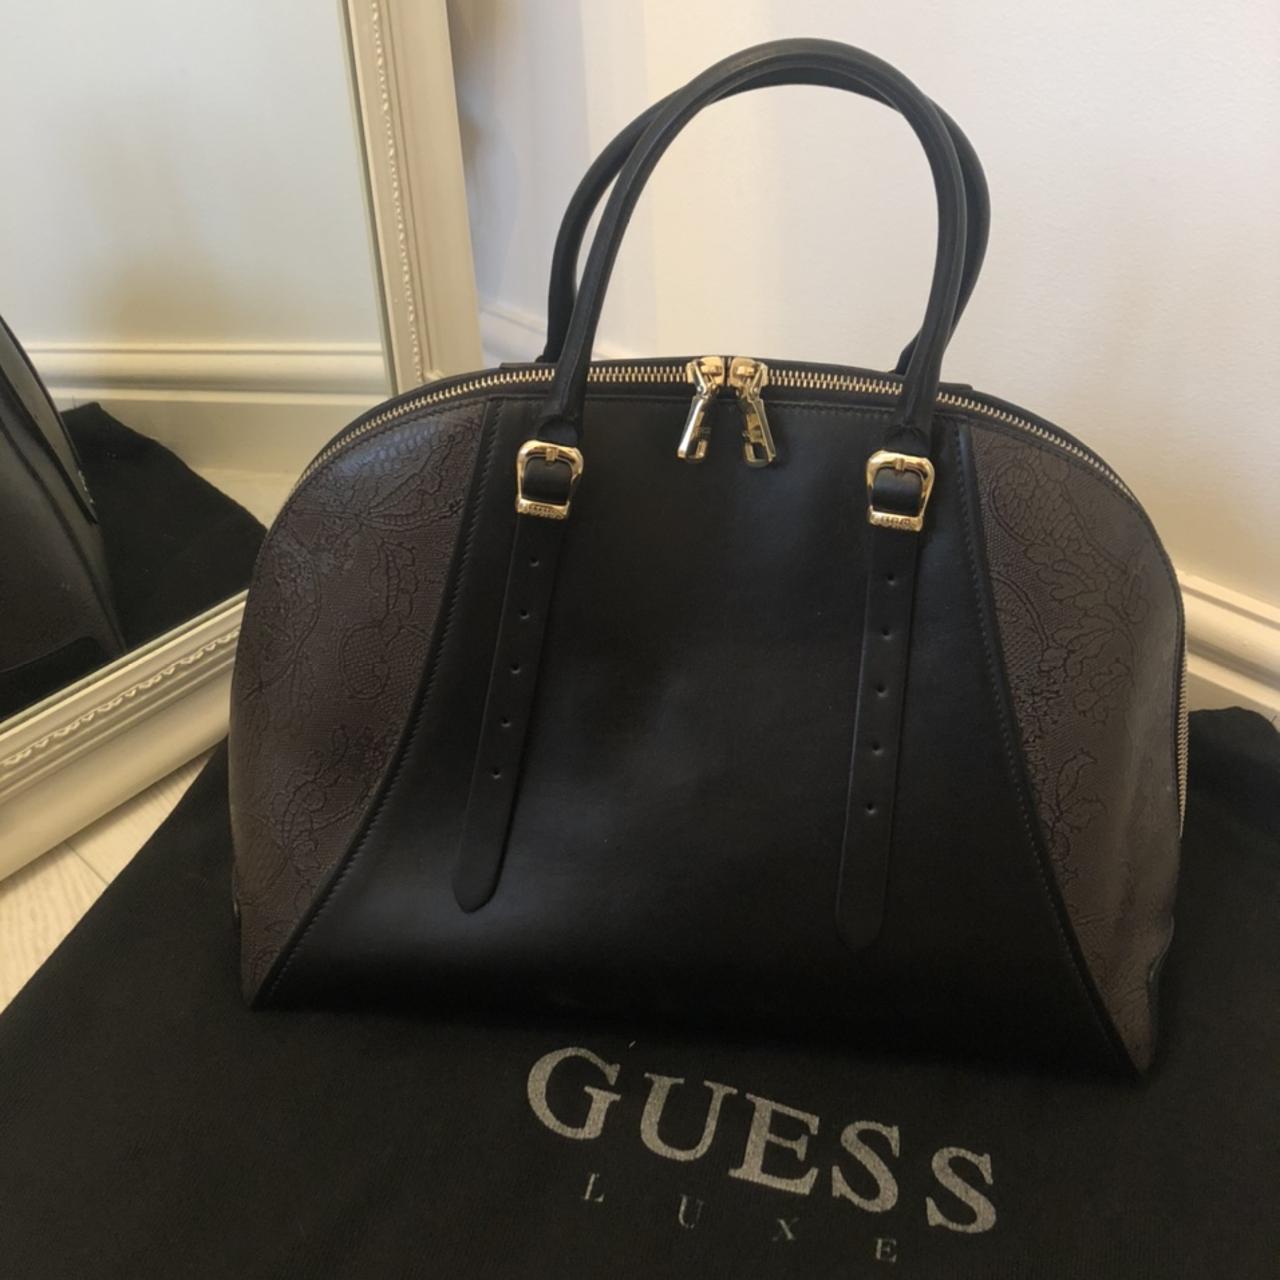 GUESS® LADY LUXE REAL LEATHER HANDBAG